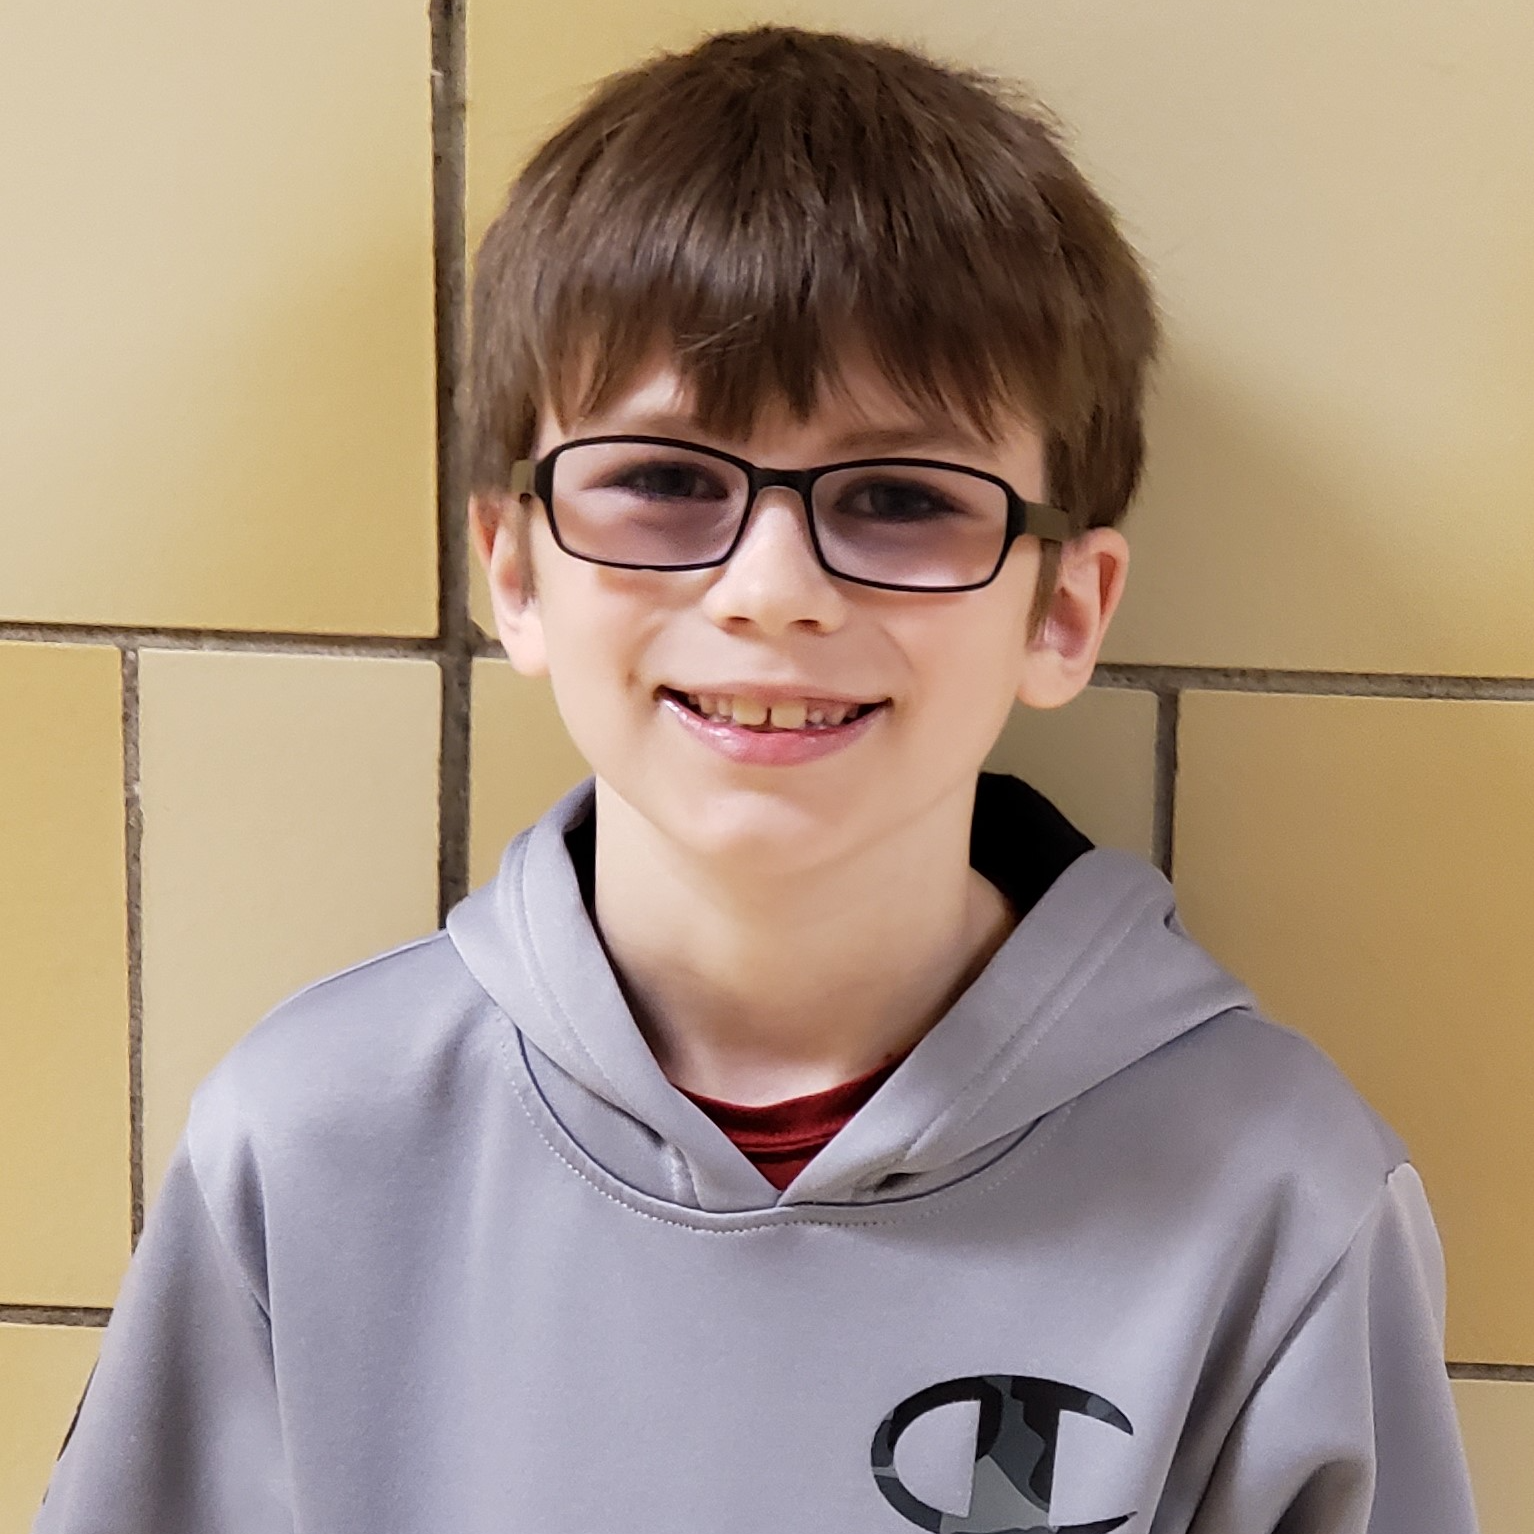 smiling boy with brown hair wearing a black-rimmed glasses and a gray hooded sweatshirt